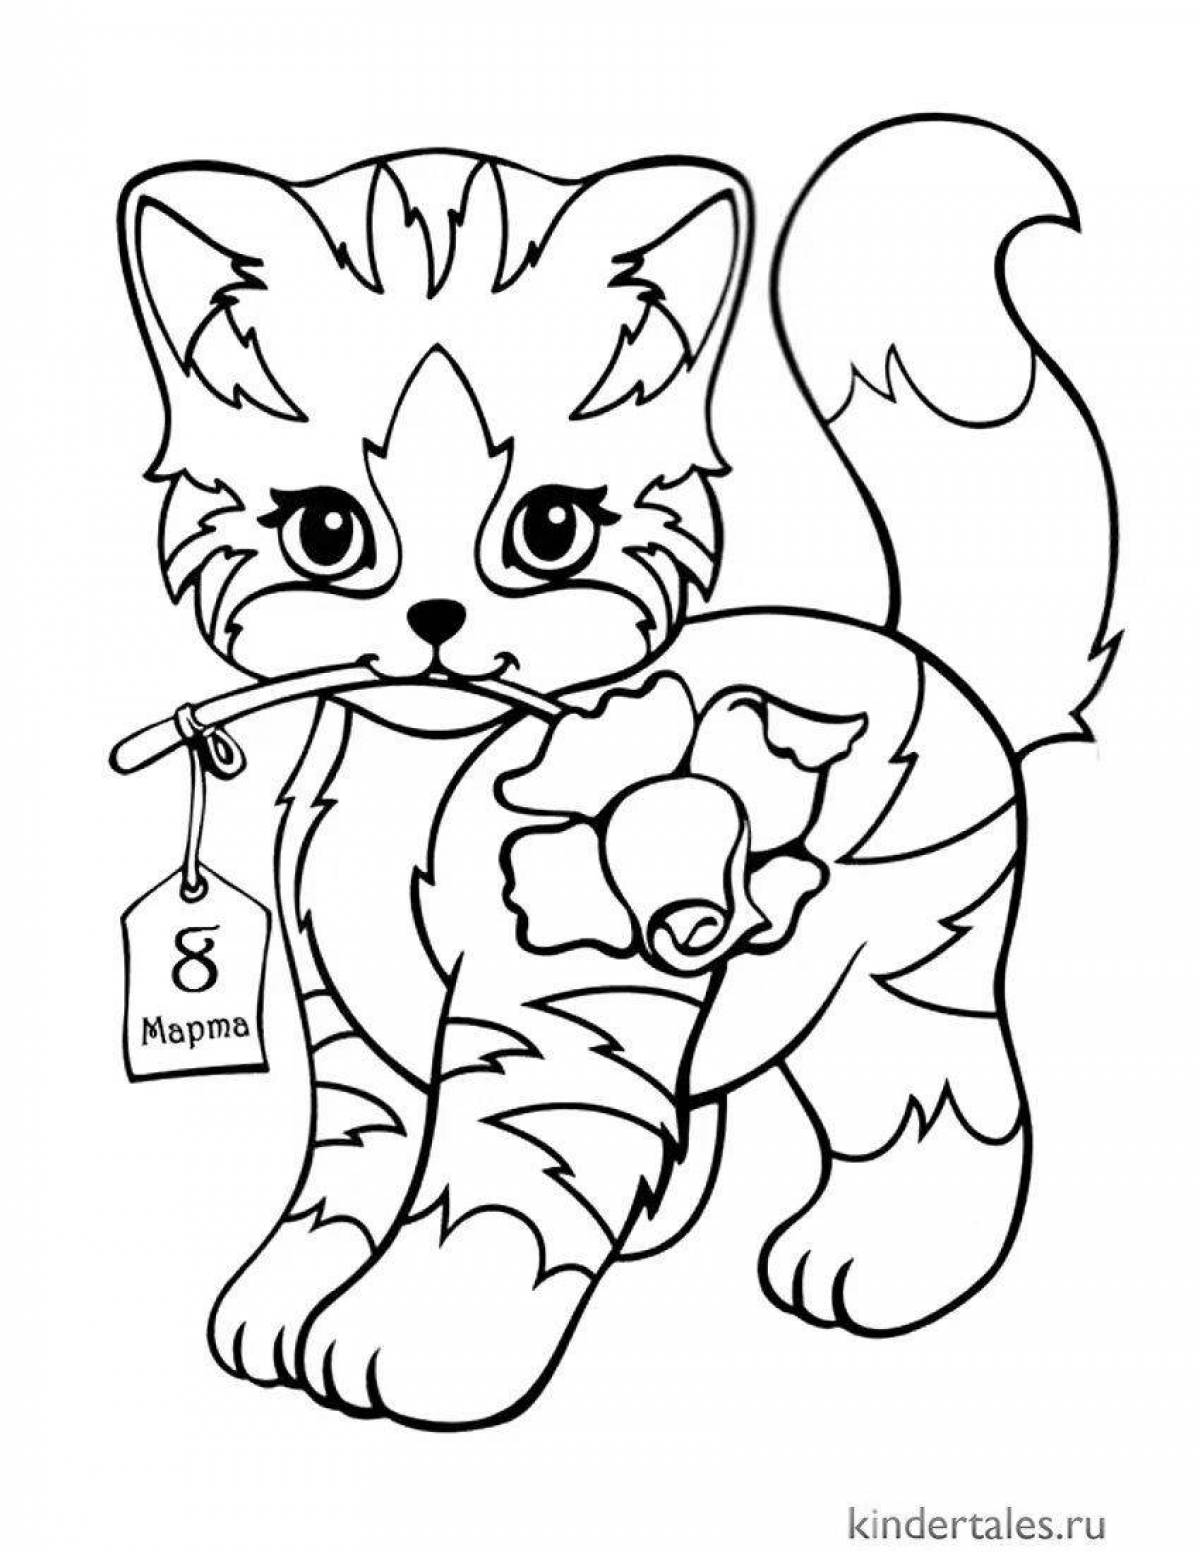 Cute kittens coloring book for 6-7 year olds